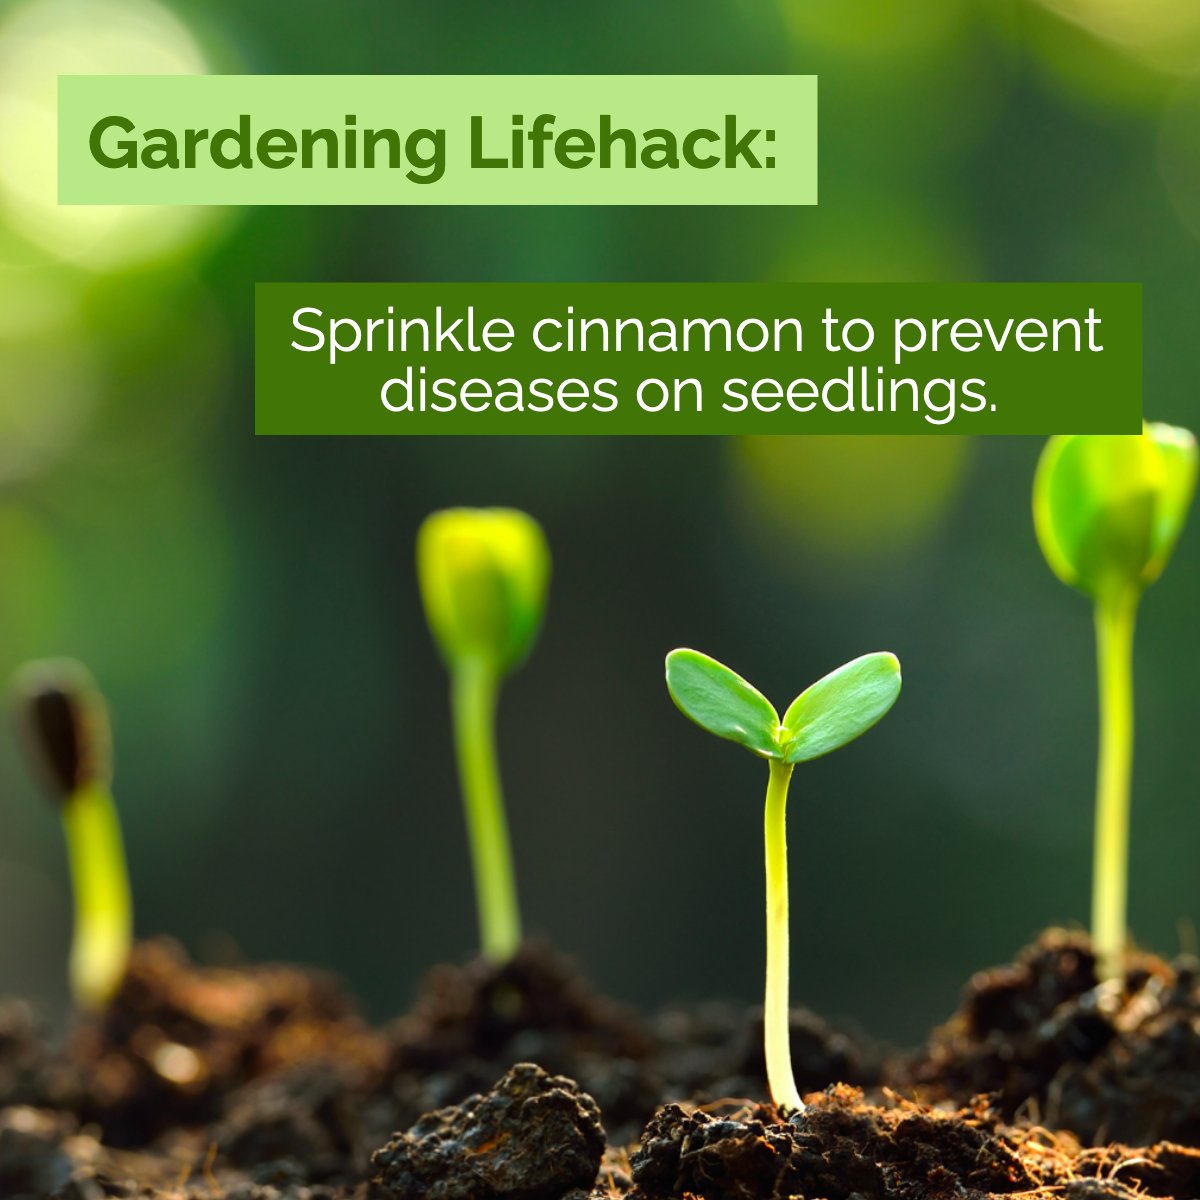 This versatile spice can be used to help root cuttings, to prevent fungus from killing small seedlings, and even for keeping pests away from your home.  🌿🌷

#gardenlife #gardendesign #mygarden #cinnamon #gardeningisfun #gardenideas #gardeninglifehack